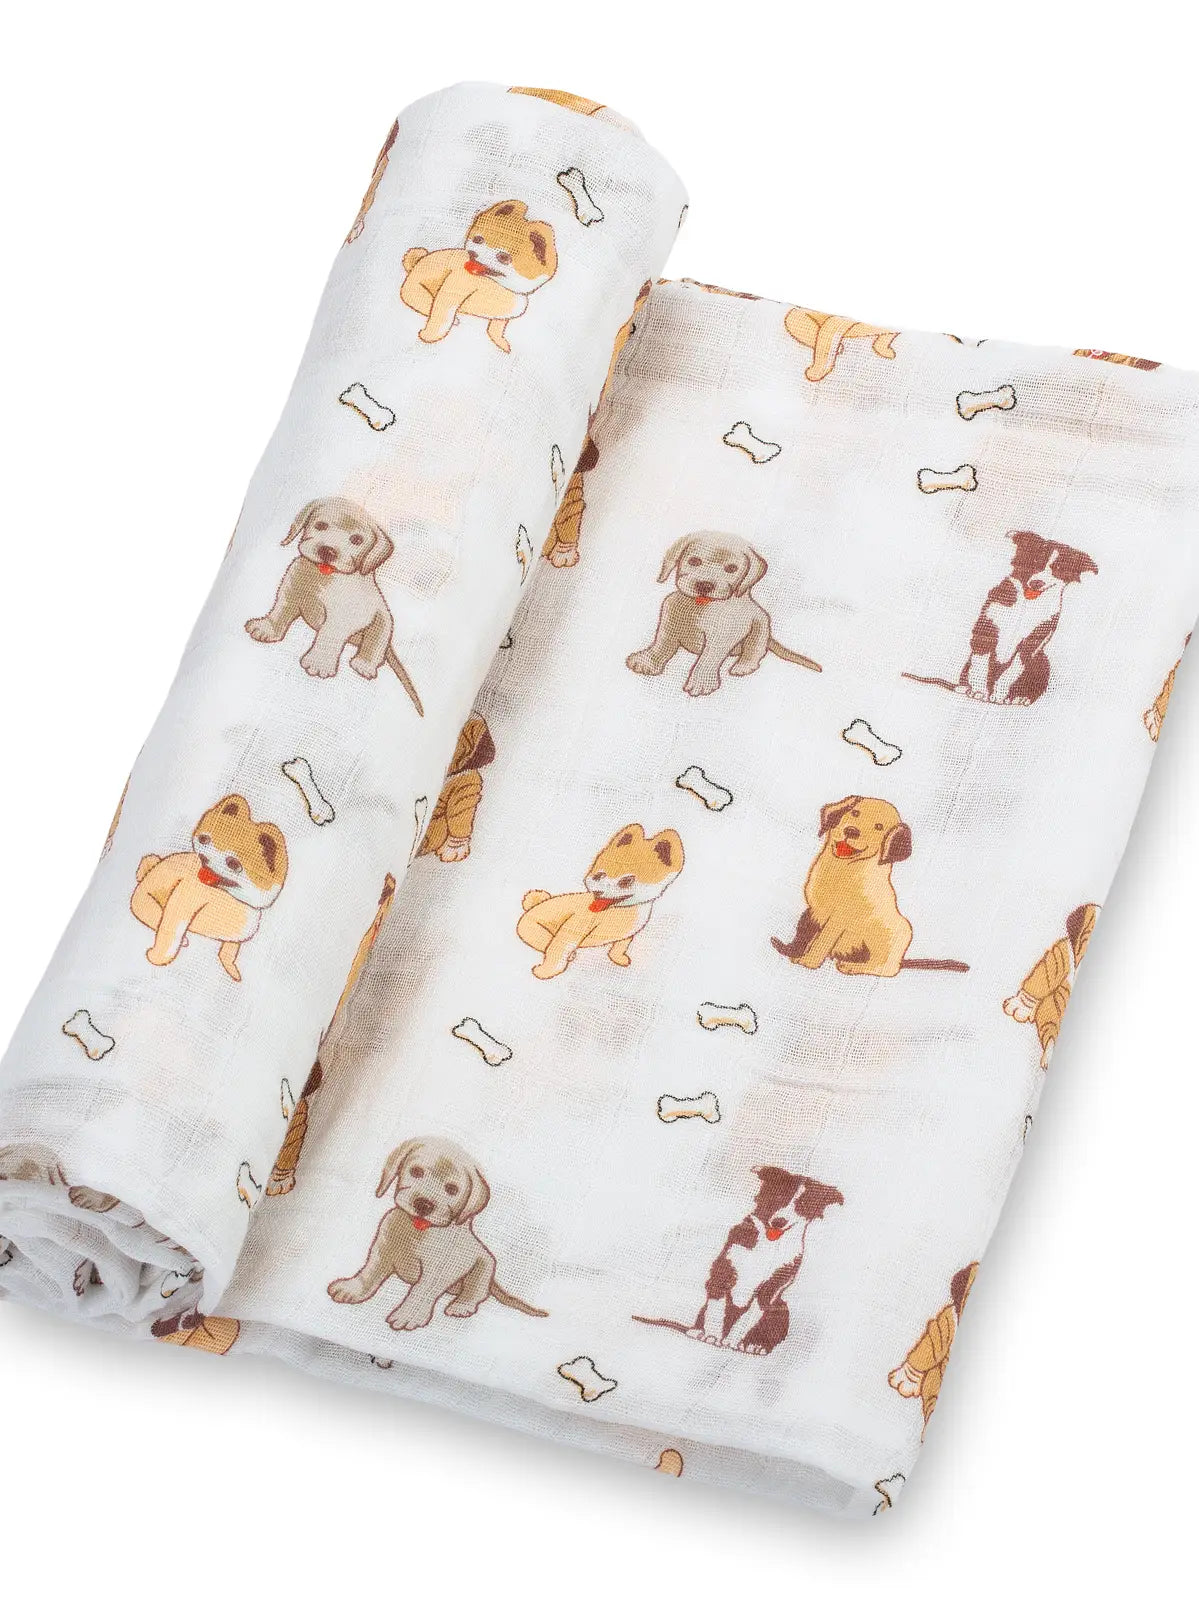 LollyBanks Swaddle Blanket + More Options